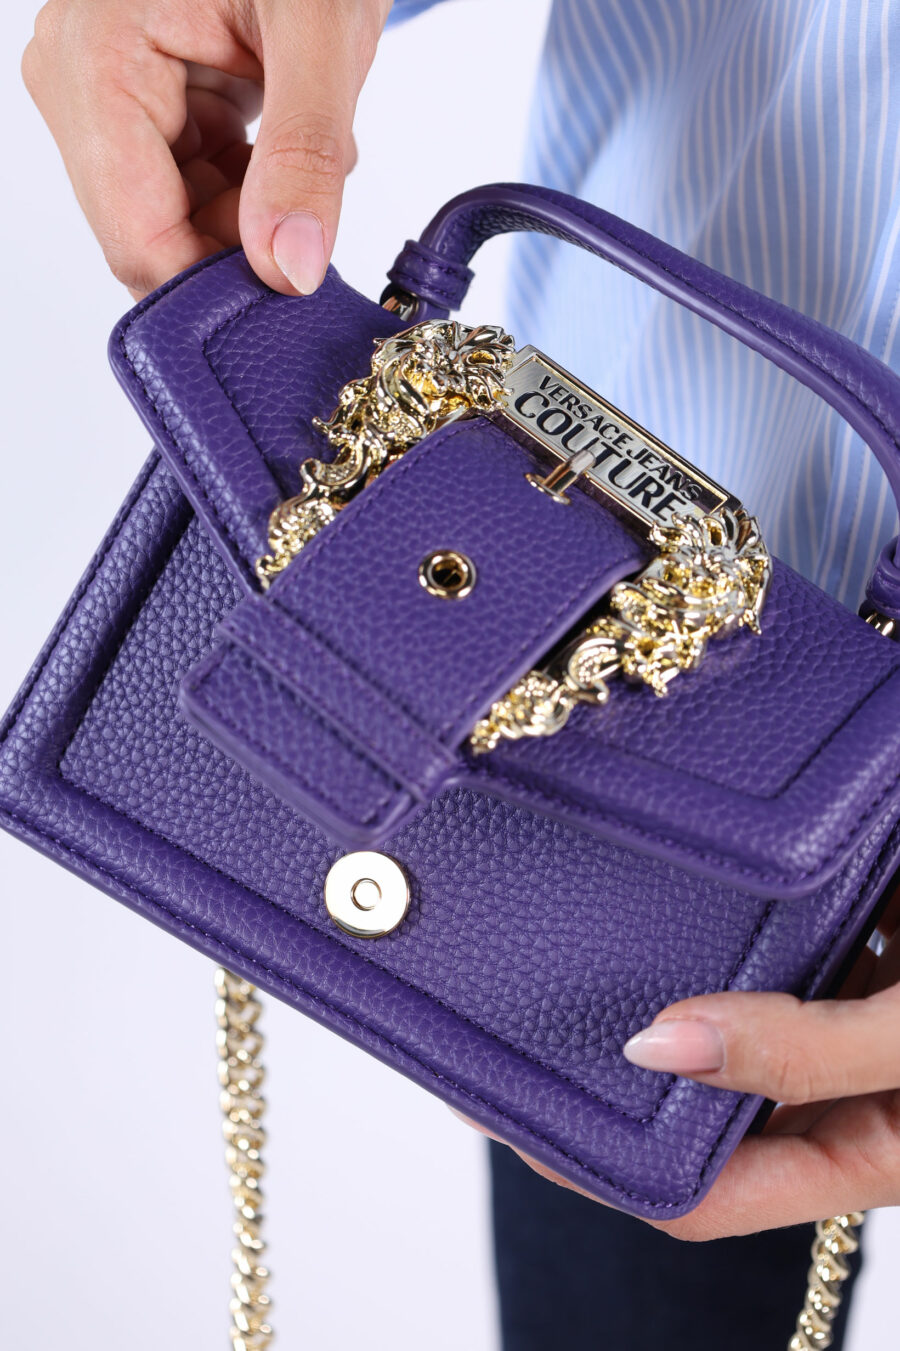 Purple shoulder bag with chain and baroque buckle - 361223054662201748